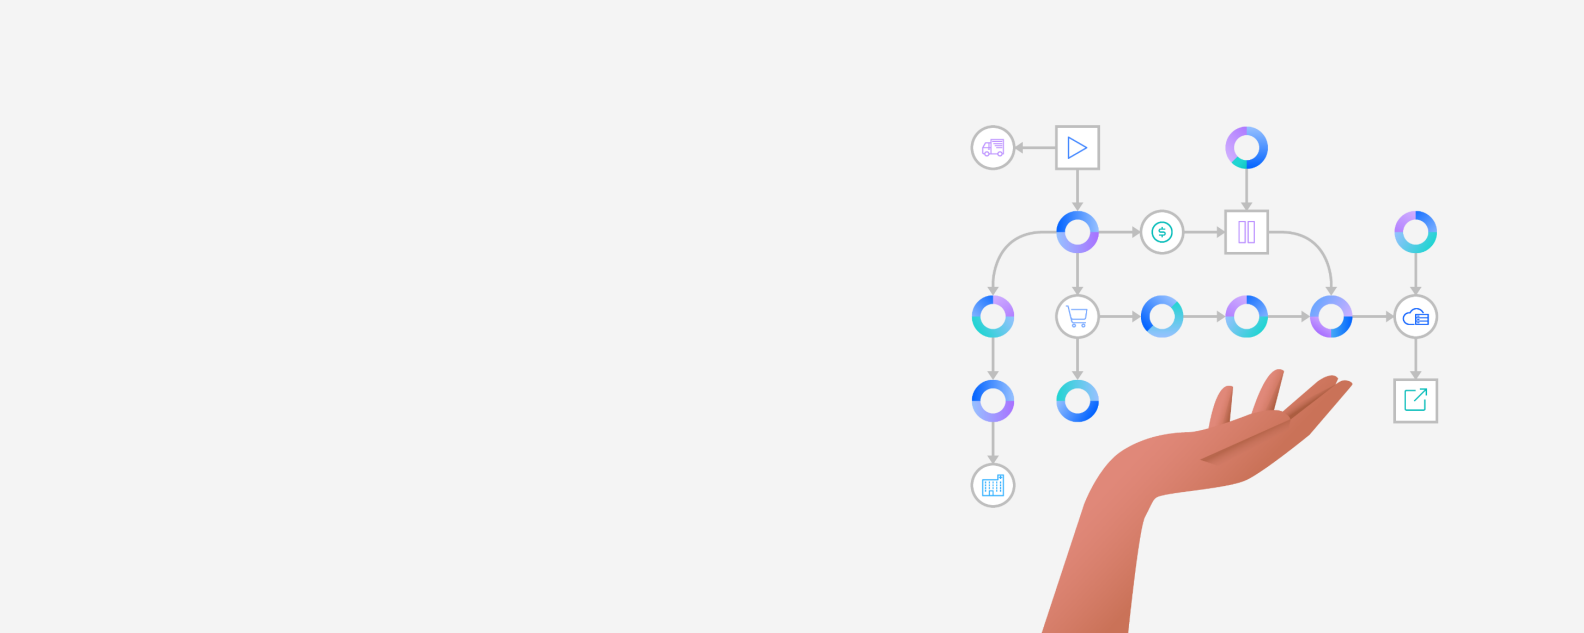 Illustration of hand holding up connected dots representing digital journey including play button, shopping cart, etc